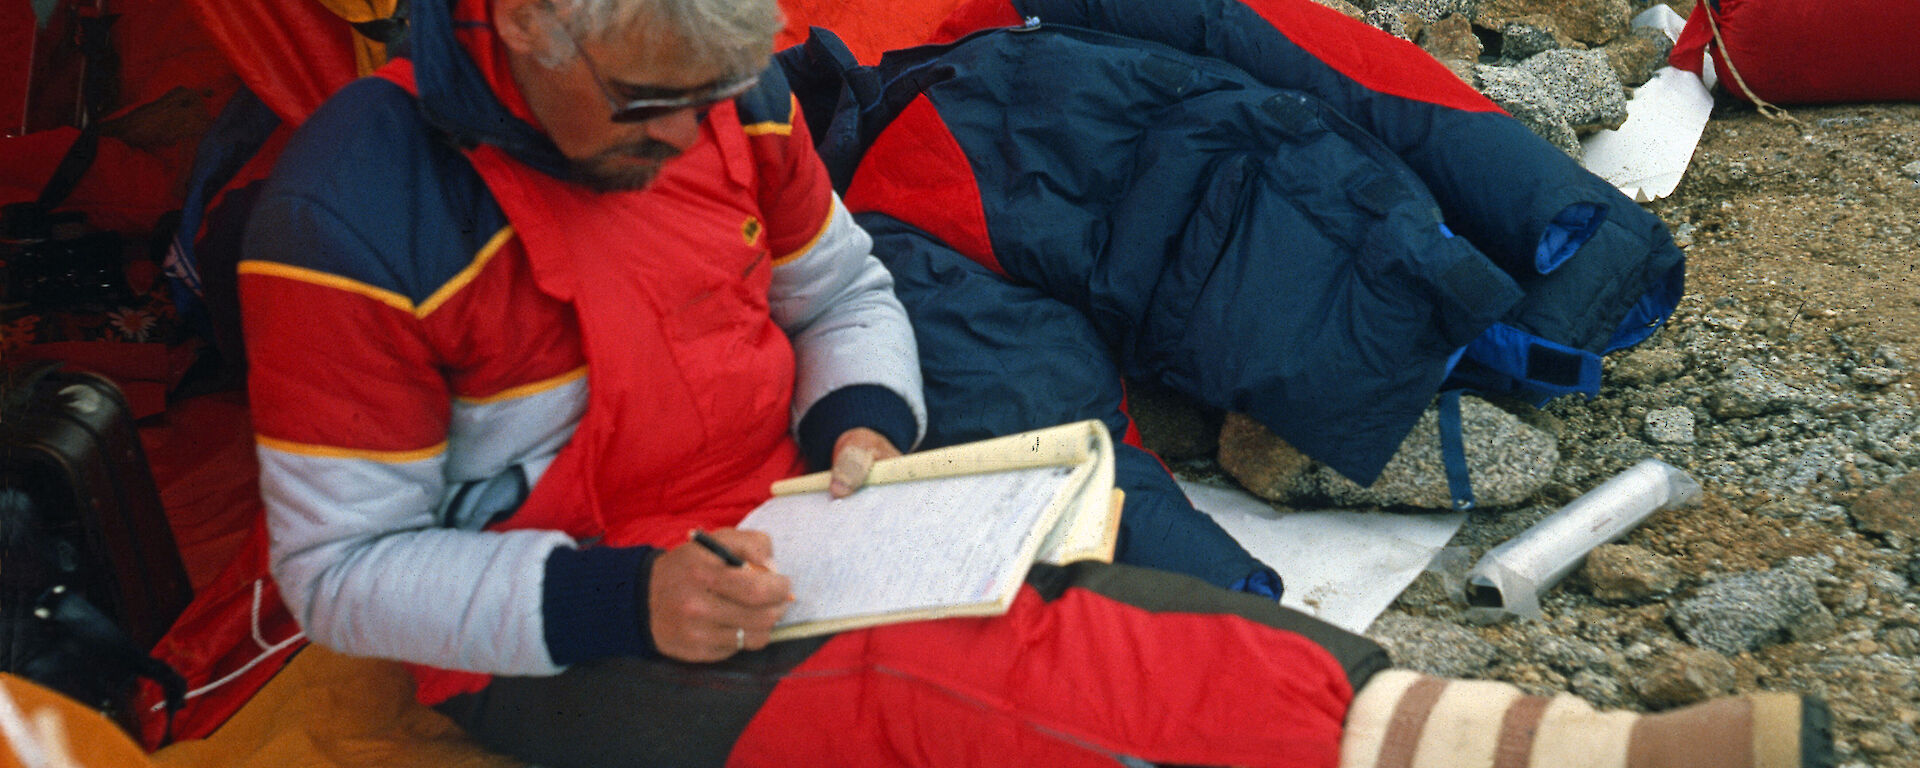 The radio operator Werner Thonhausen of the Gotland II at the entrance of his emergency tent at Birthday Ridge. Werner is still updating his radio log-book and surrounded by the only possessions that he could salvage from the ship after its sinking in December 1981.